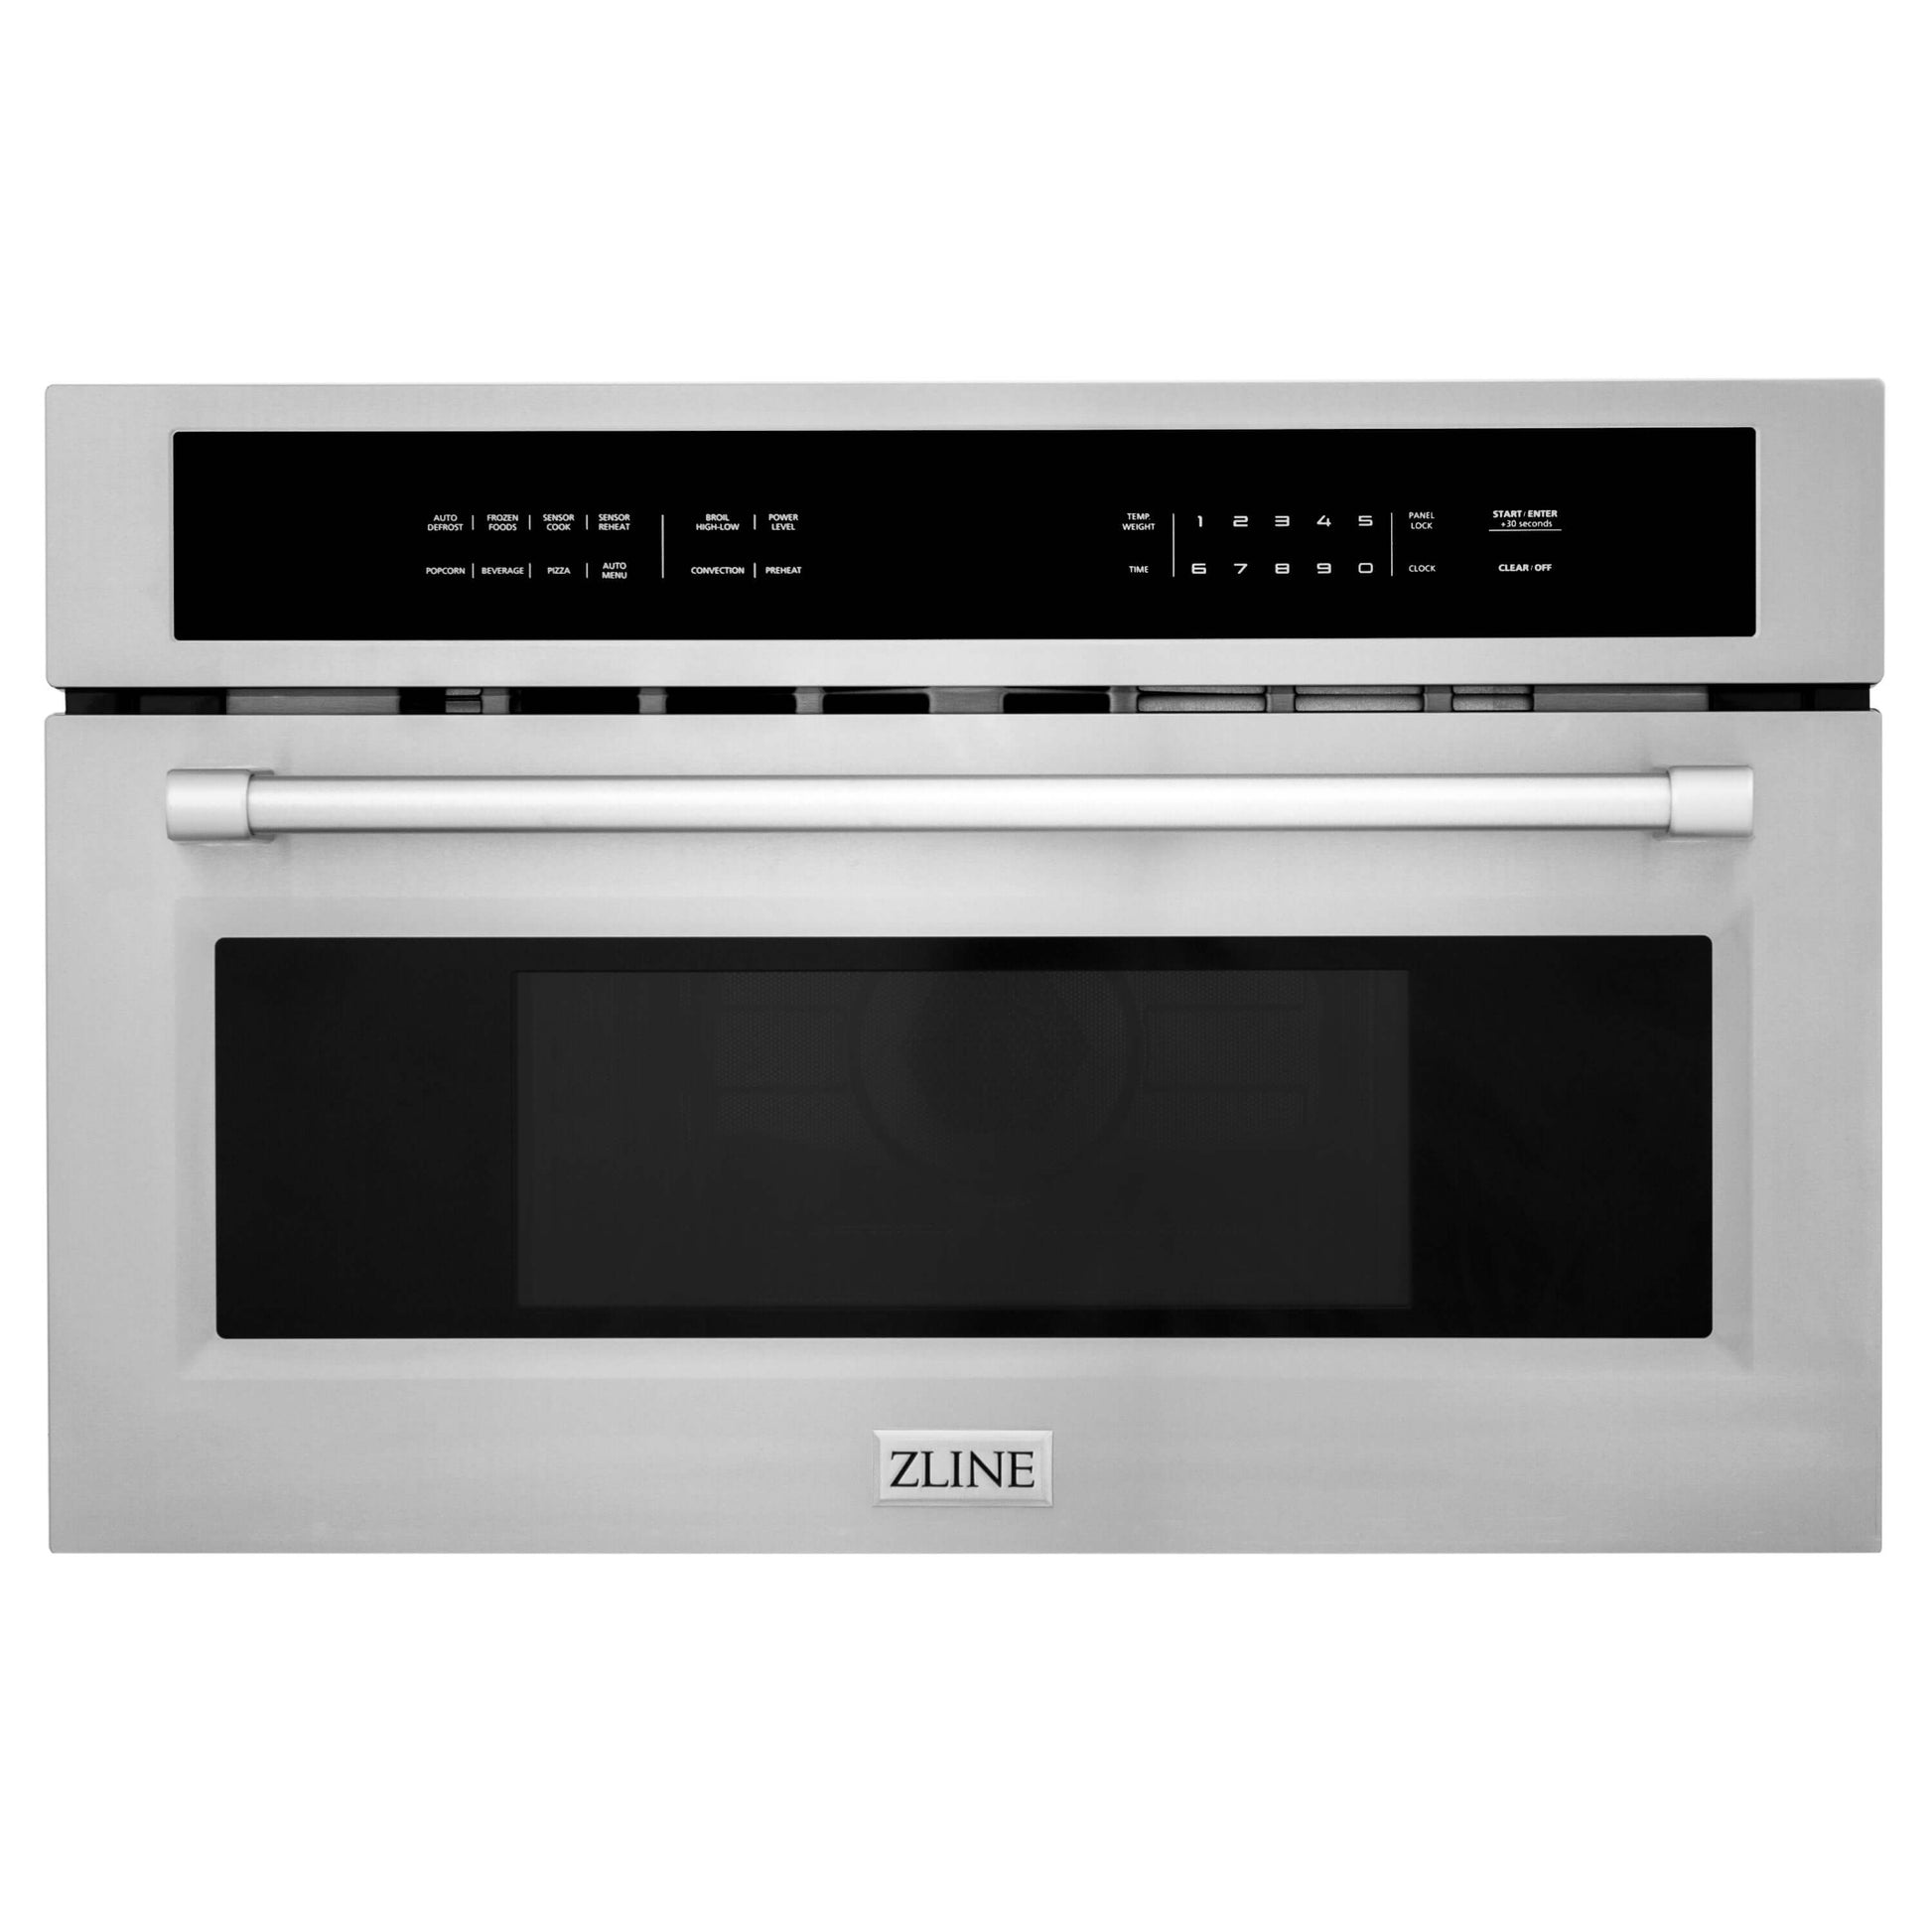 ZLINE 30 in. 1.6 cu ft. Stainless Steel Built-in Convection Microwave Oven (MWO-30) front, closed.